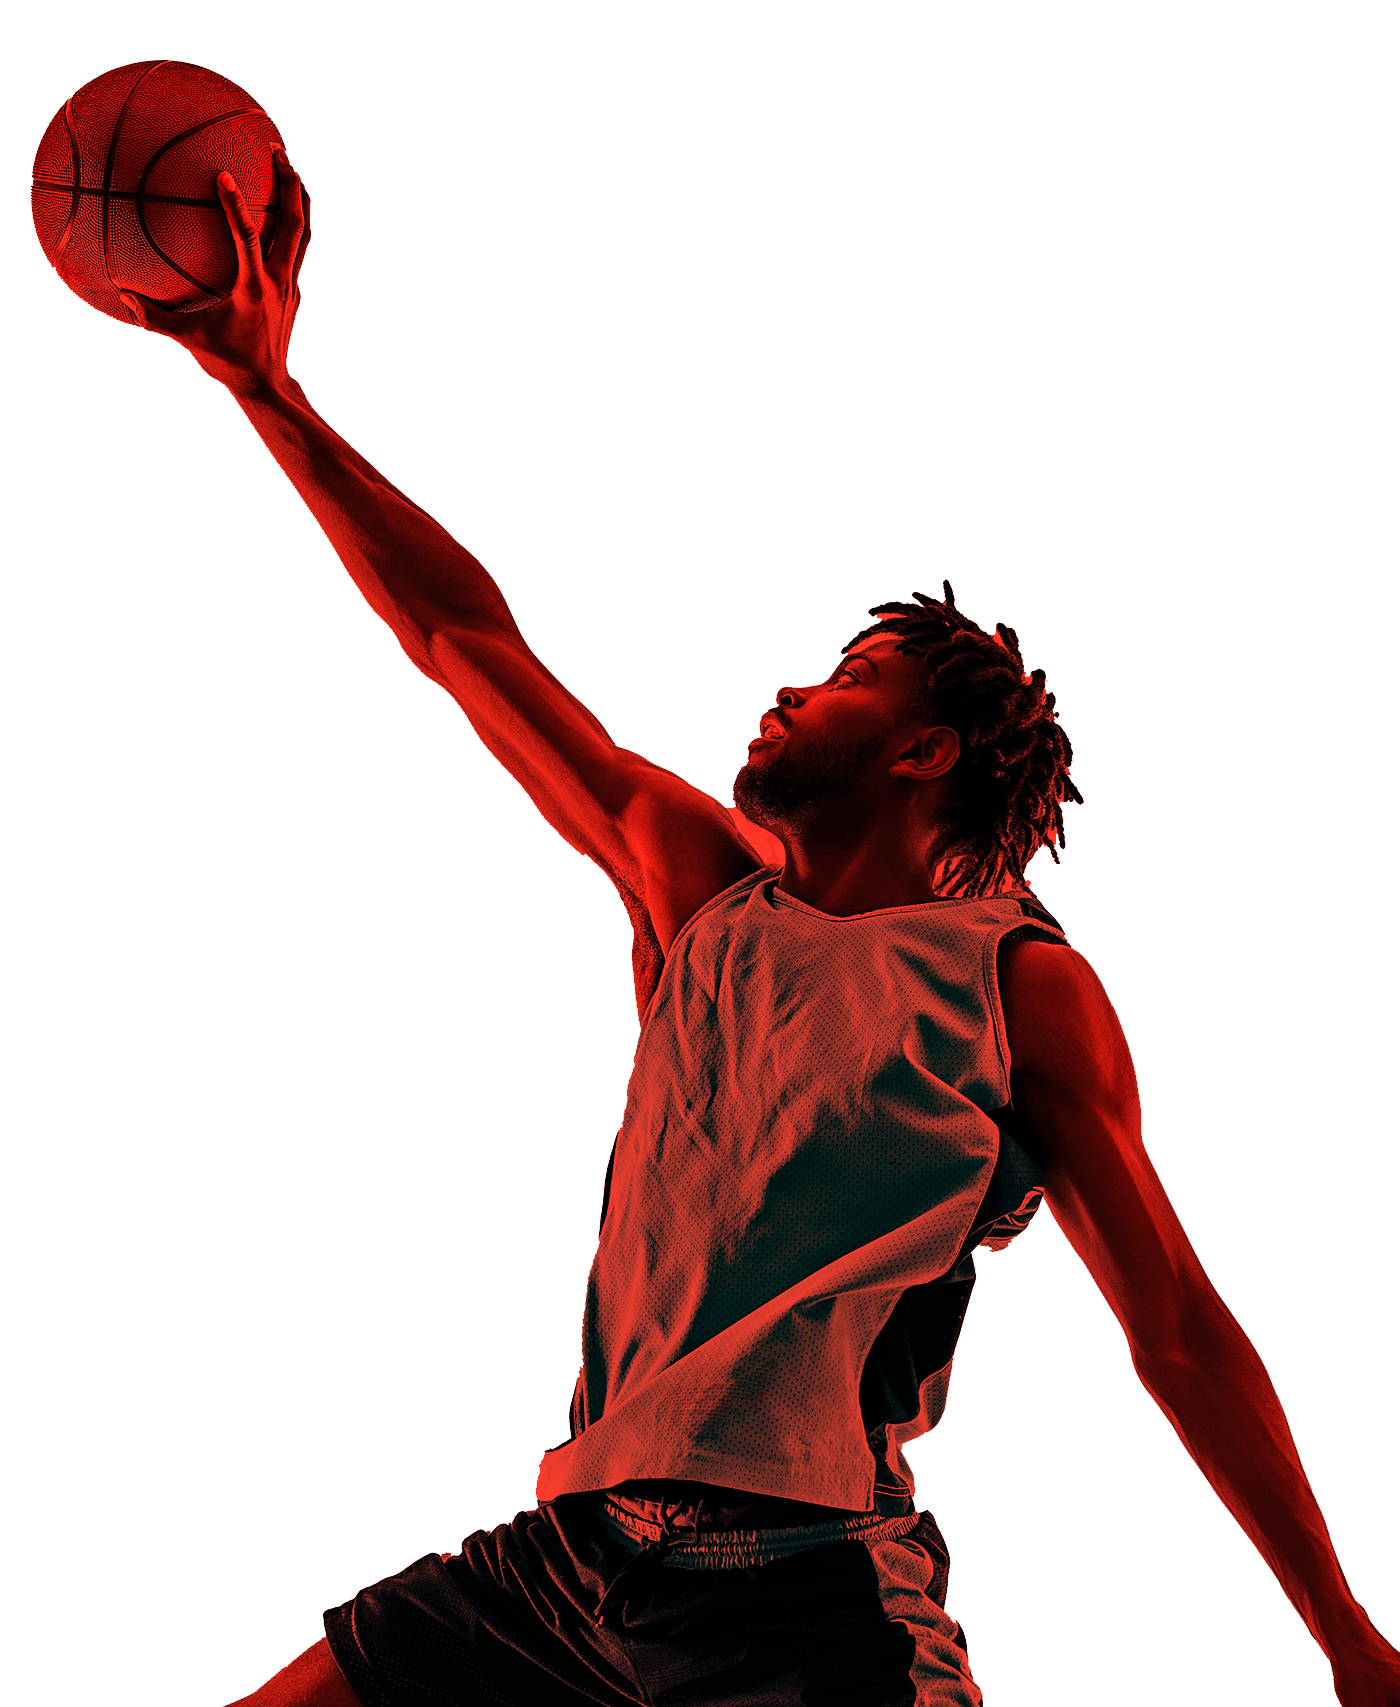 In the picture, a male basketball player extends one of their arms holding the ball to score a basket.